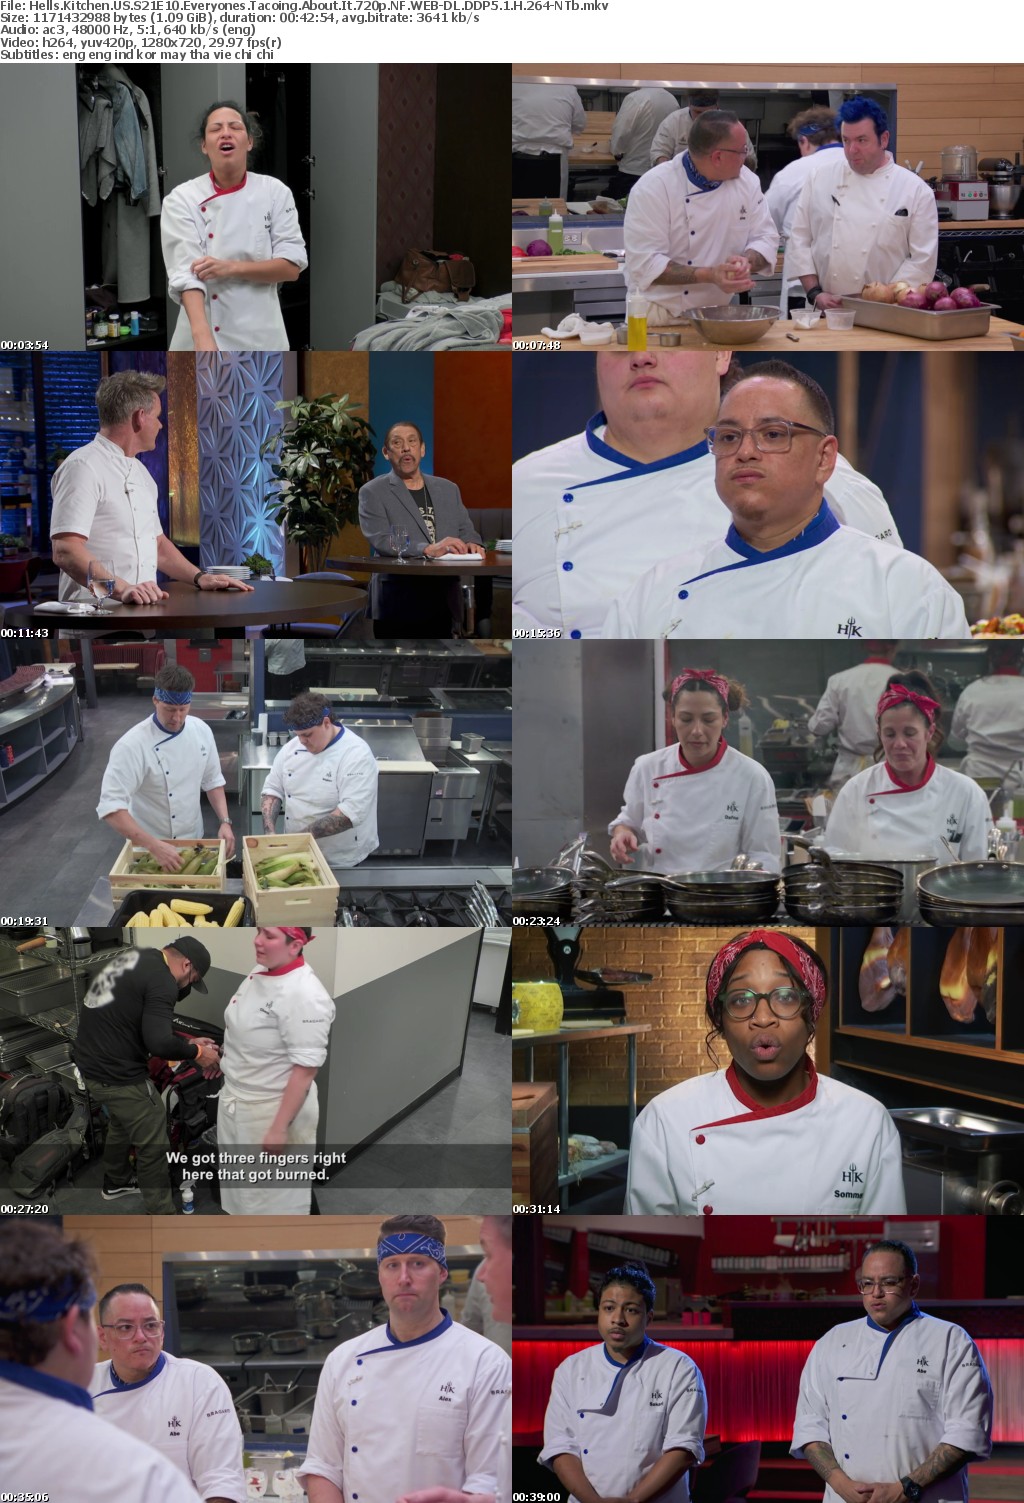 Hells Kitchen US S21E10 Everyones Tacoing About It 720p NF WEBRip DDP5 1 x264-NTb